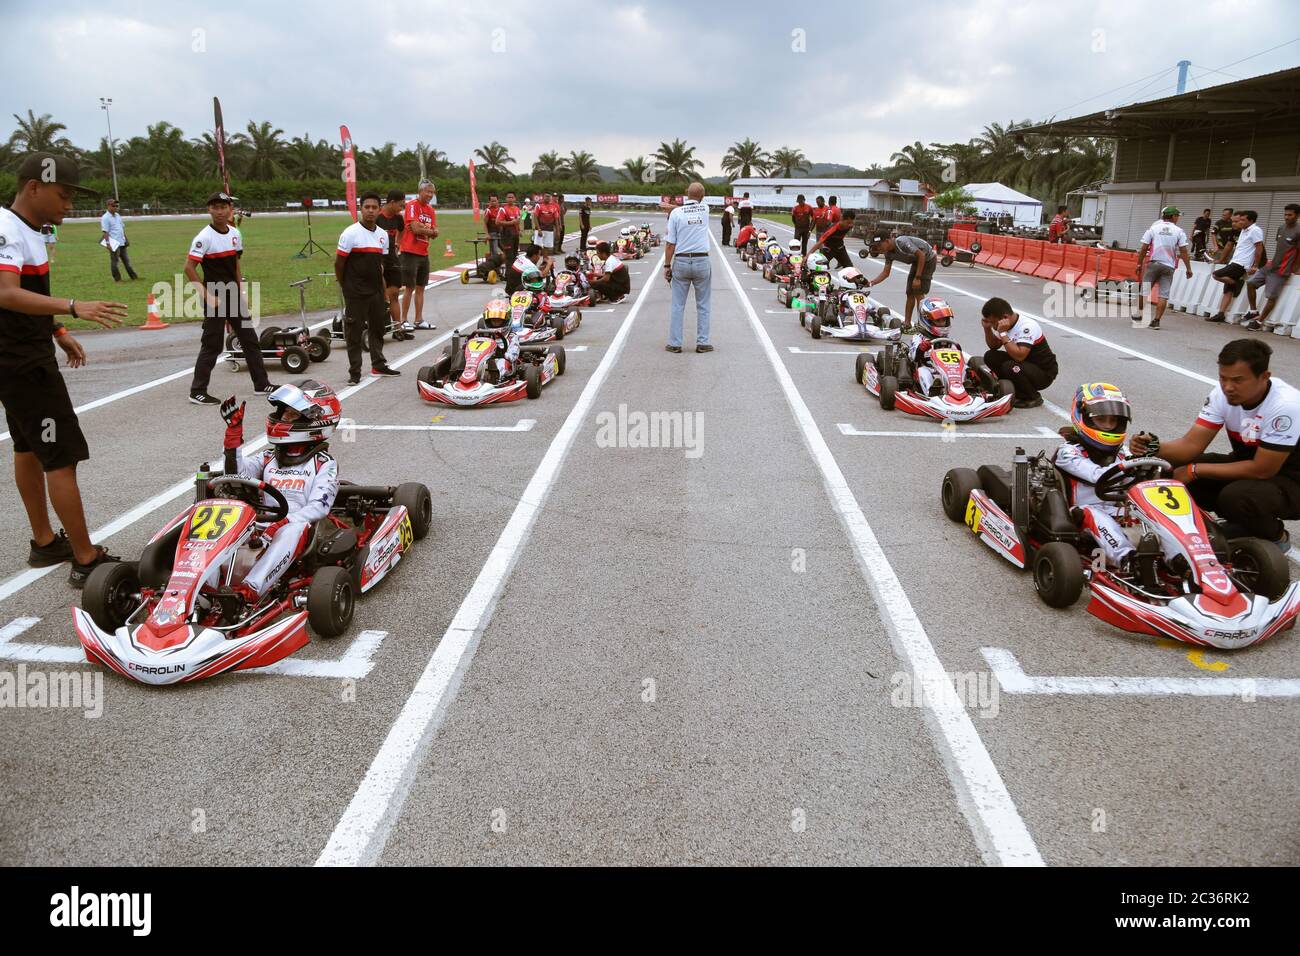 Kart racers getting ready on the starting point of the race track. Stock Photo